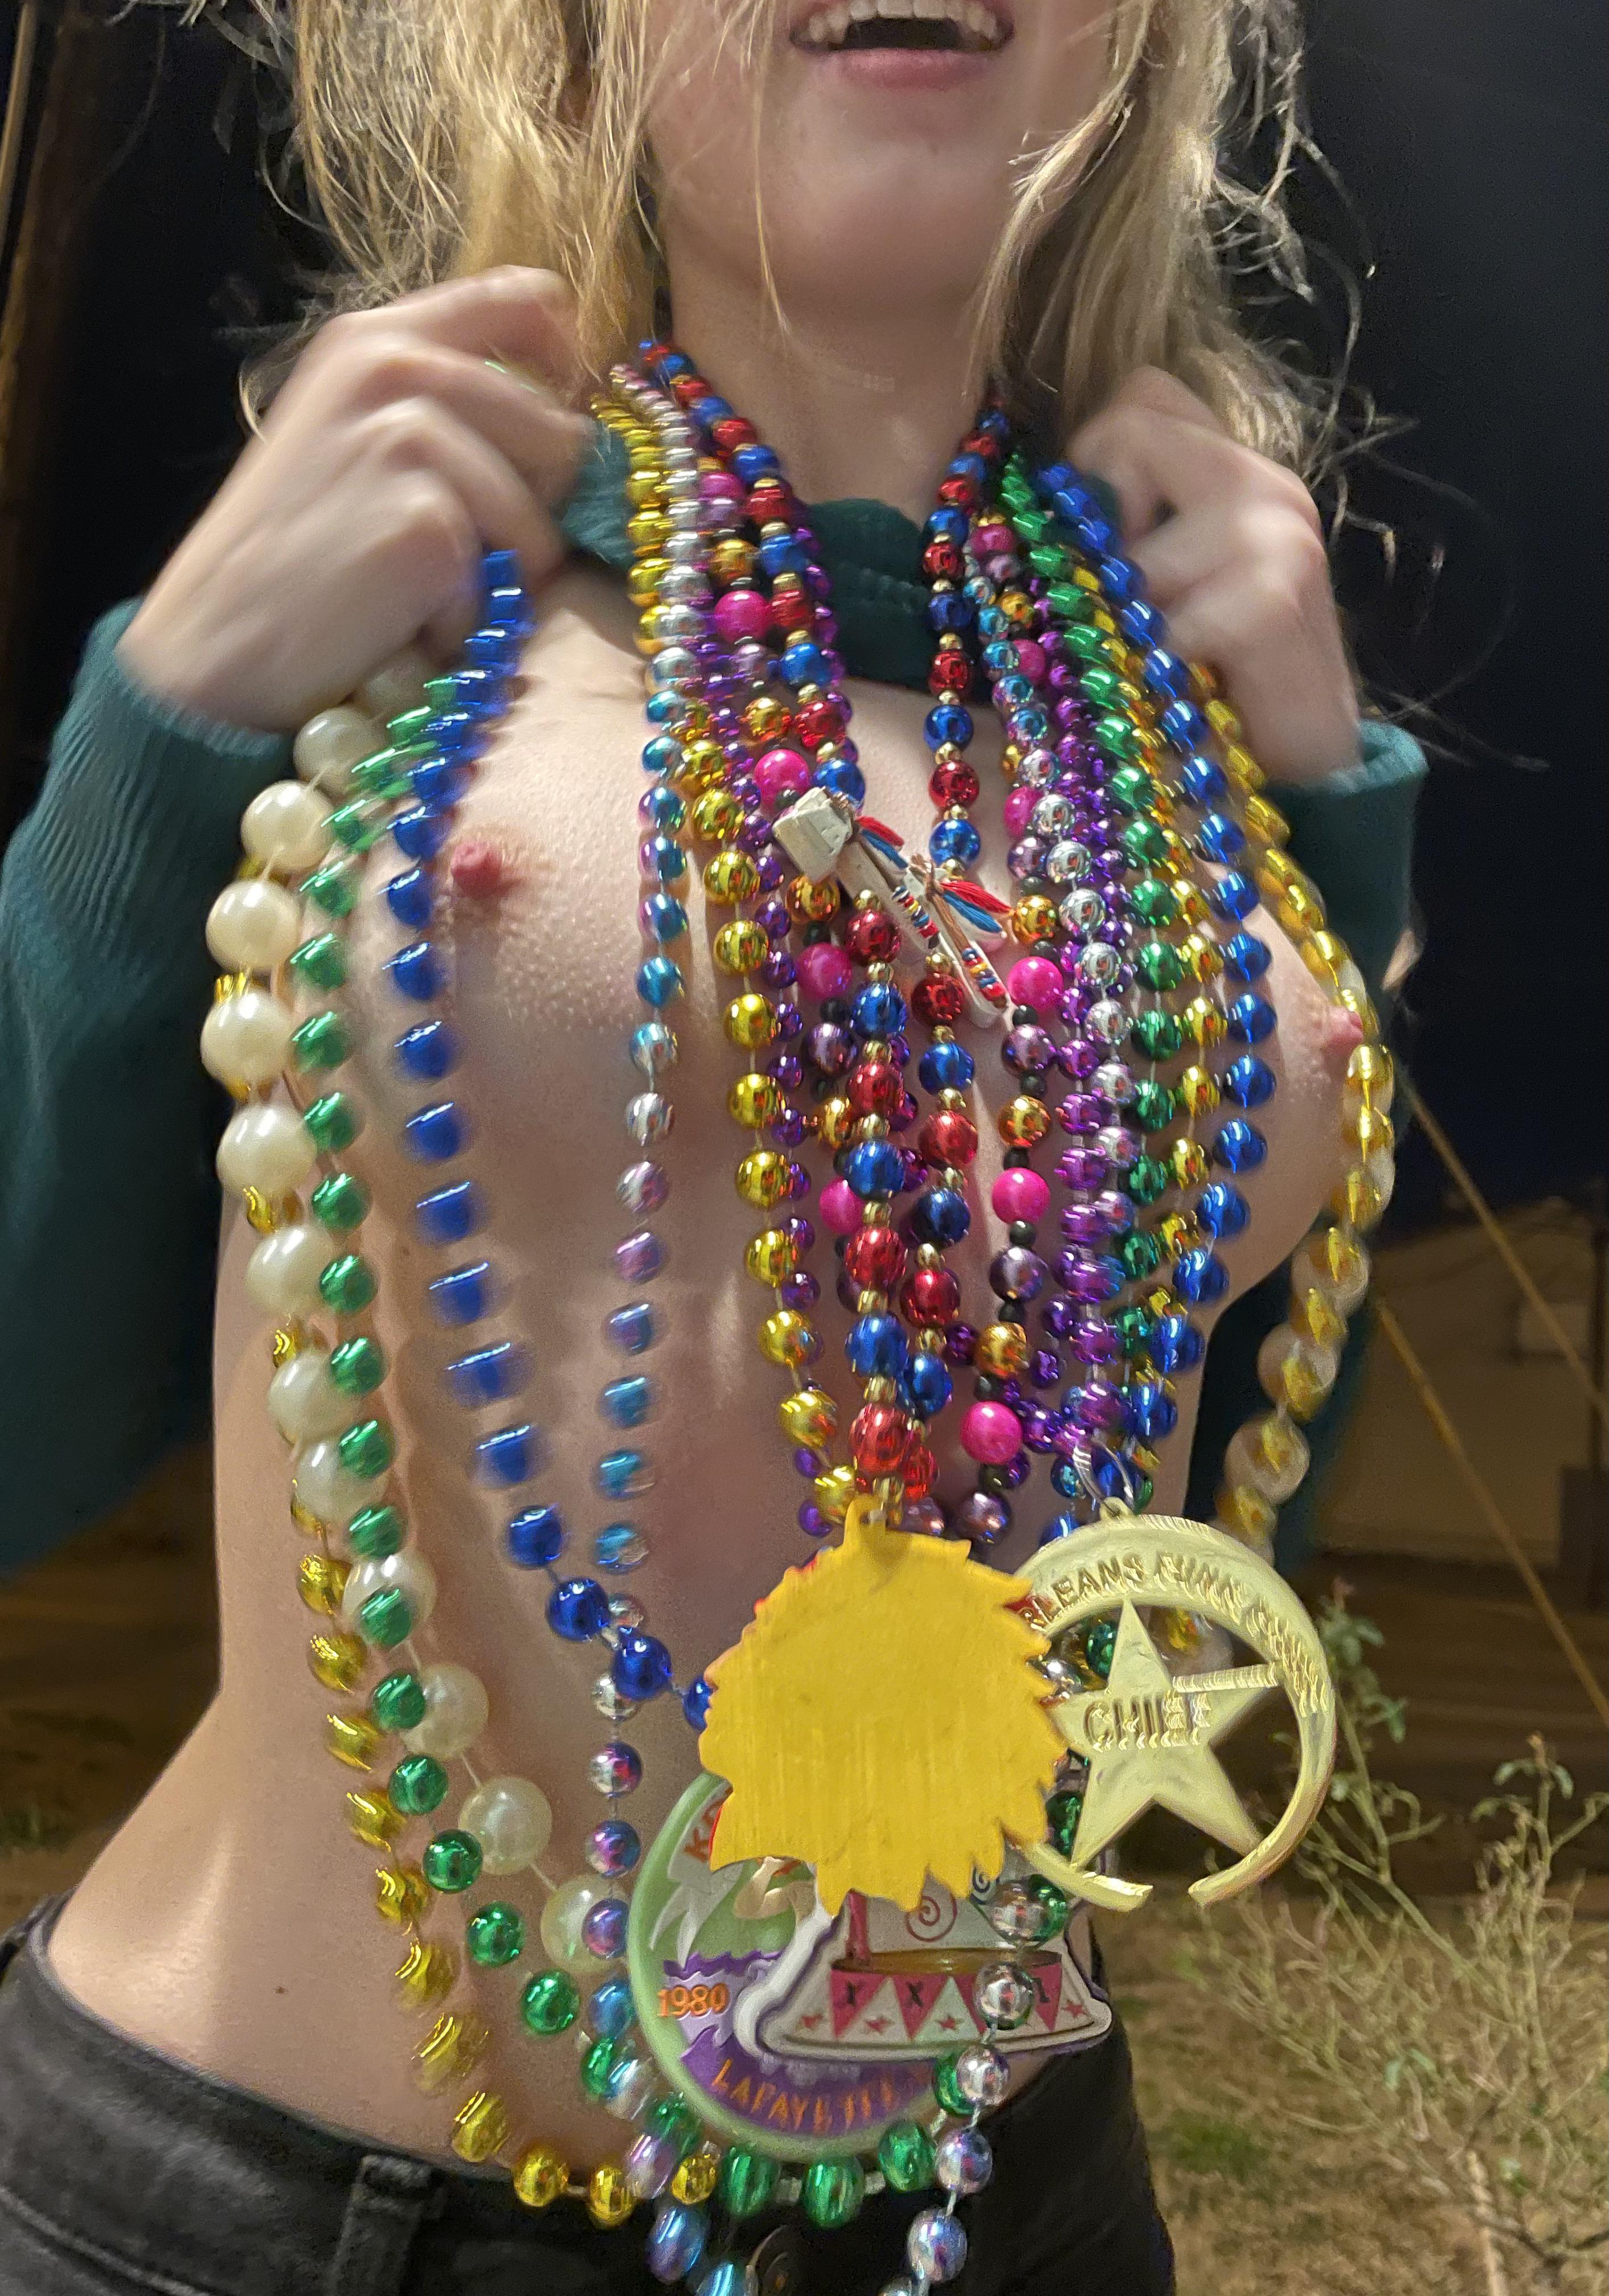 Mardi Gras is the best time of the year to flash my titties in public!